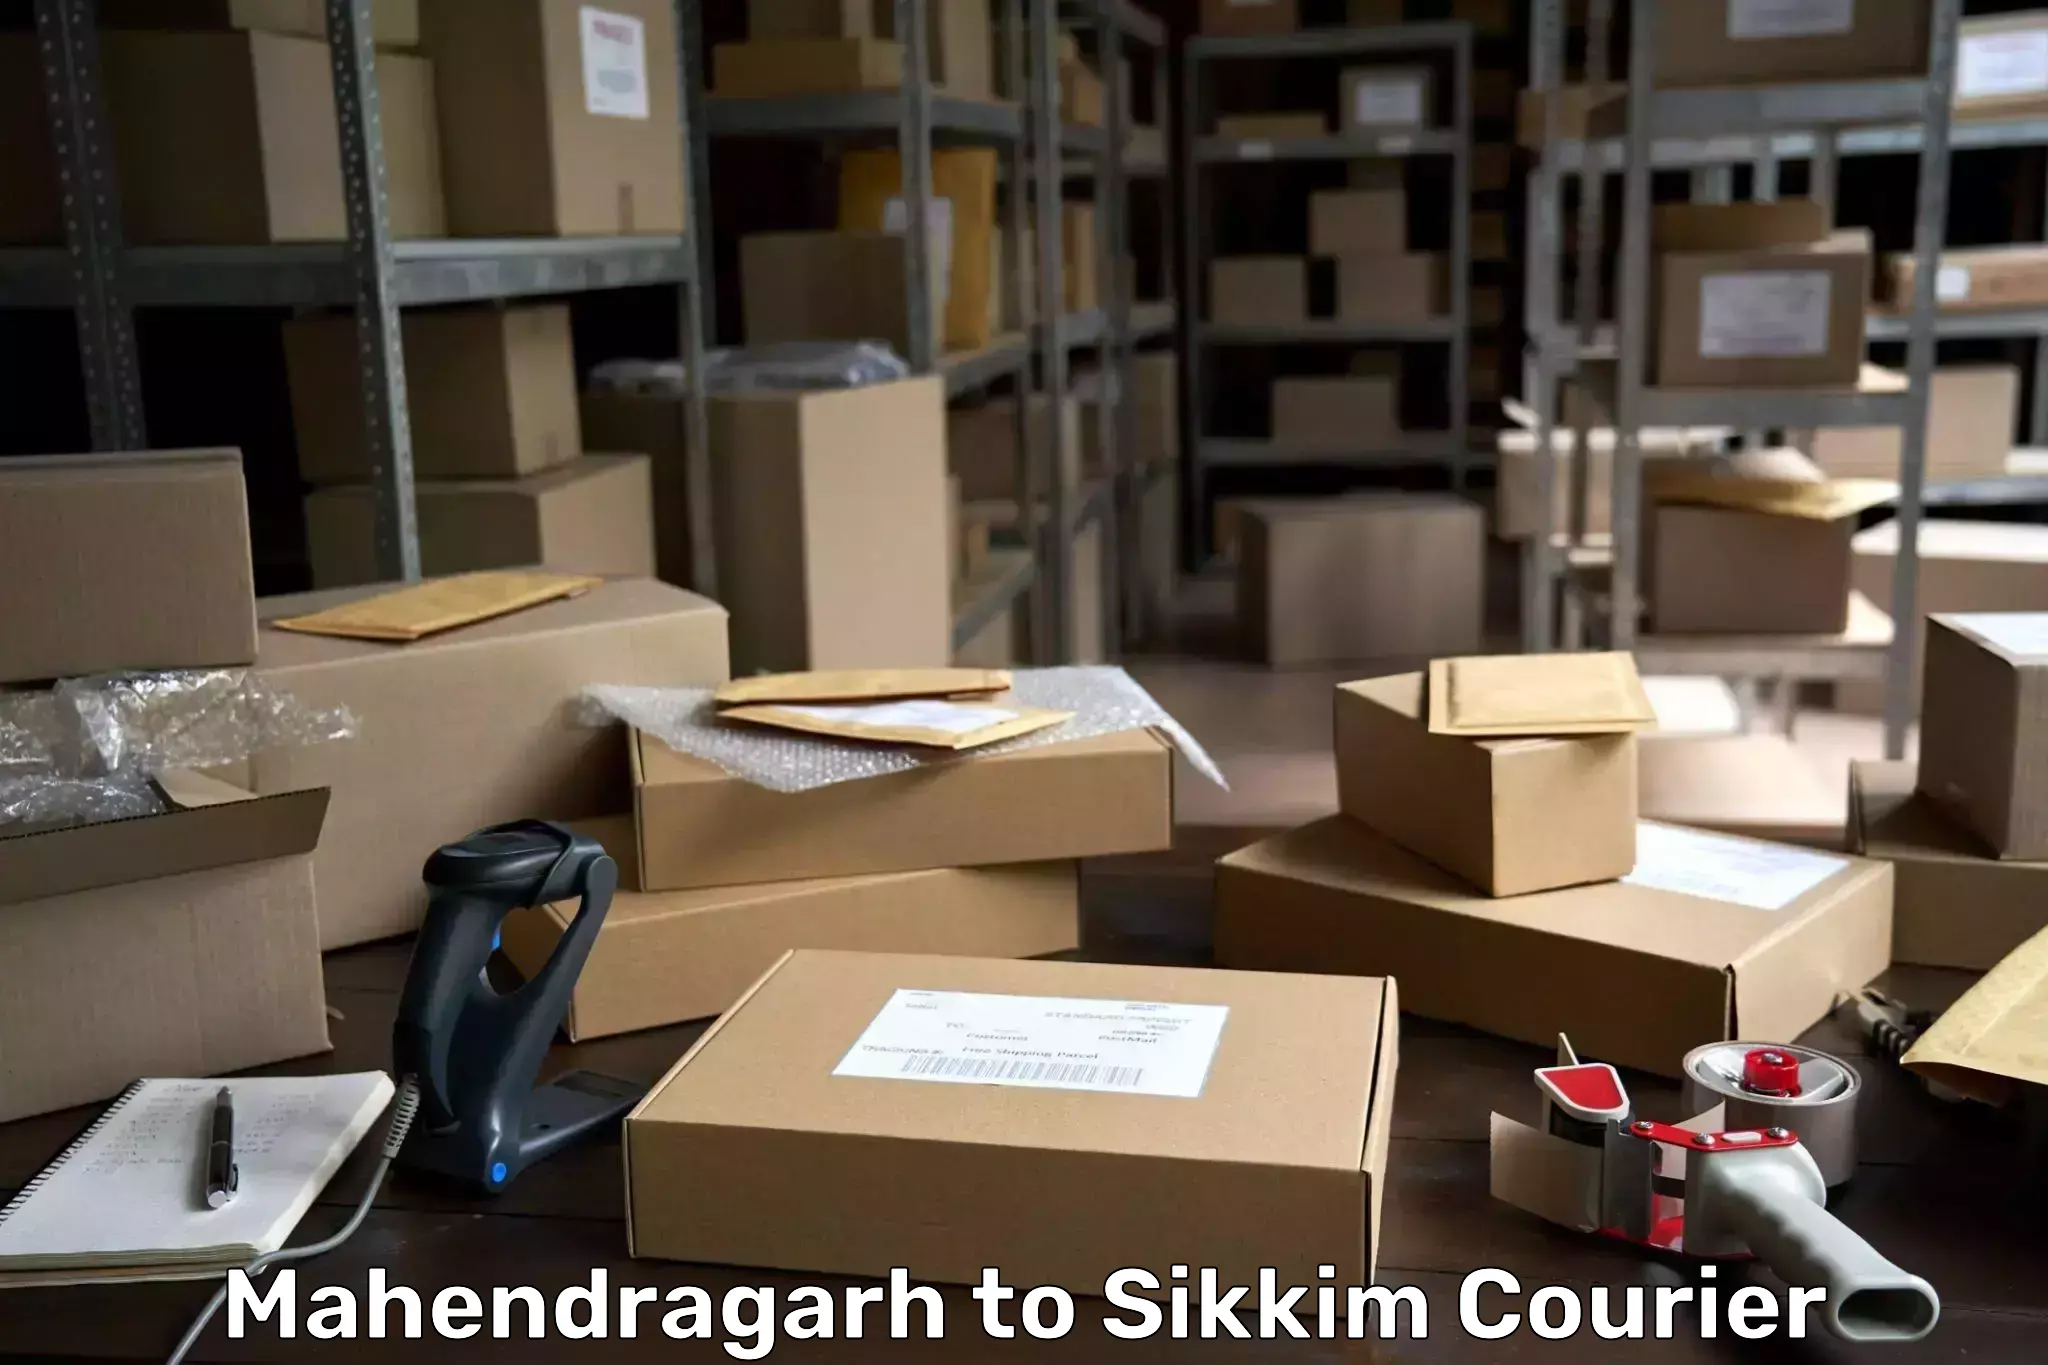 State-of-the-art courier technology Mahendragarh to West Sikkim